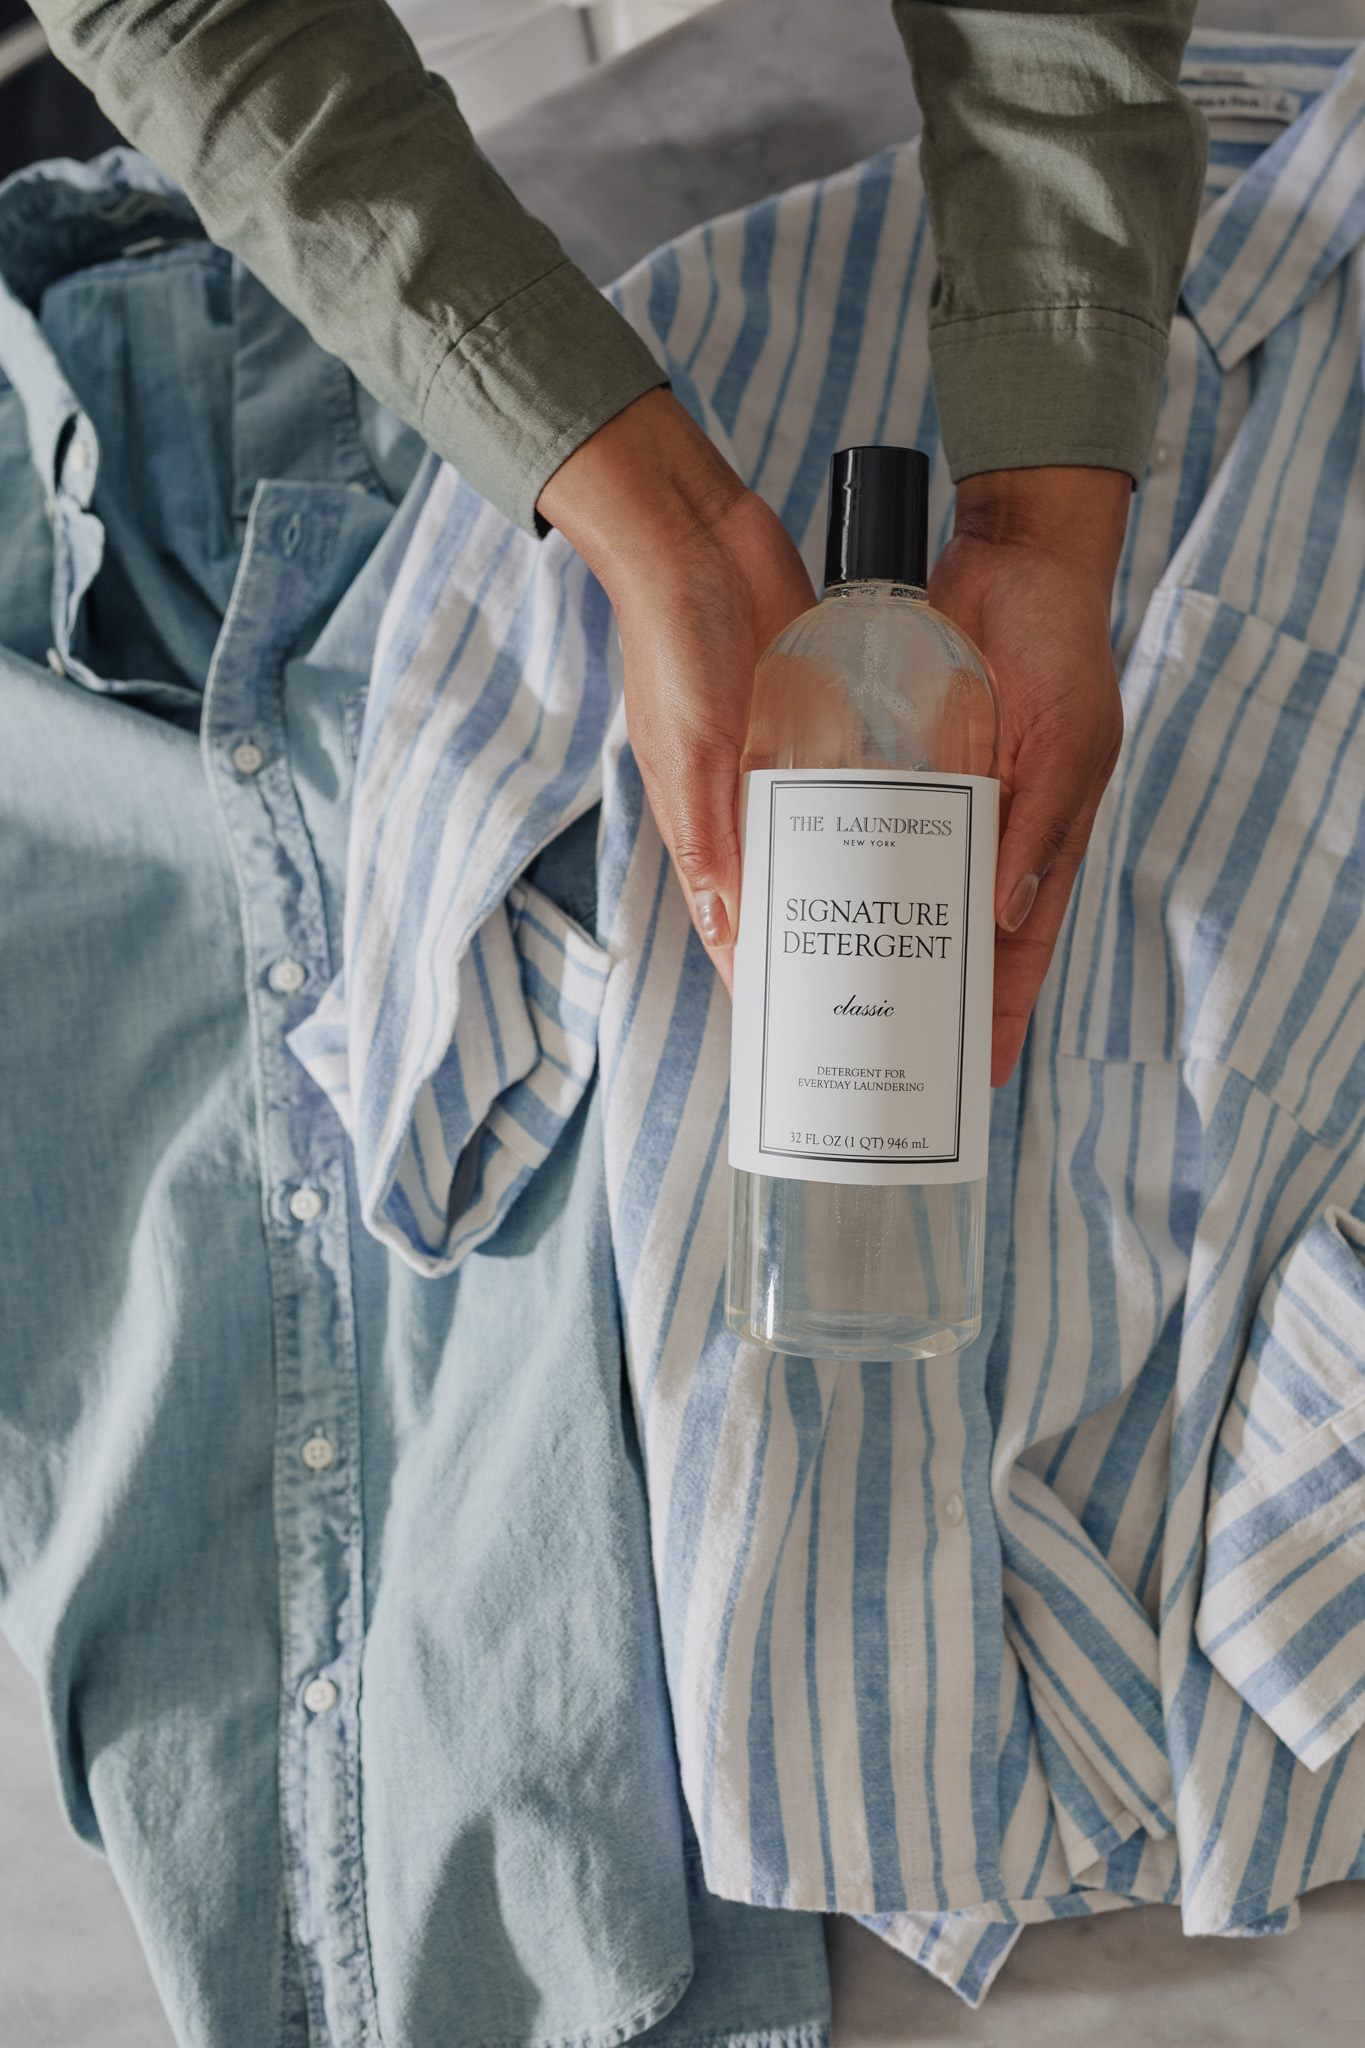 hands holding the laundress signature detergent over a pile of shirts